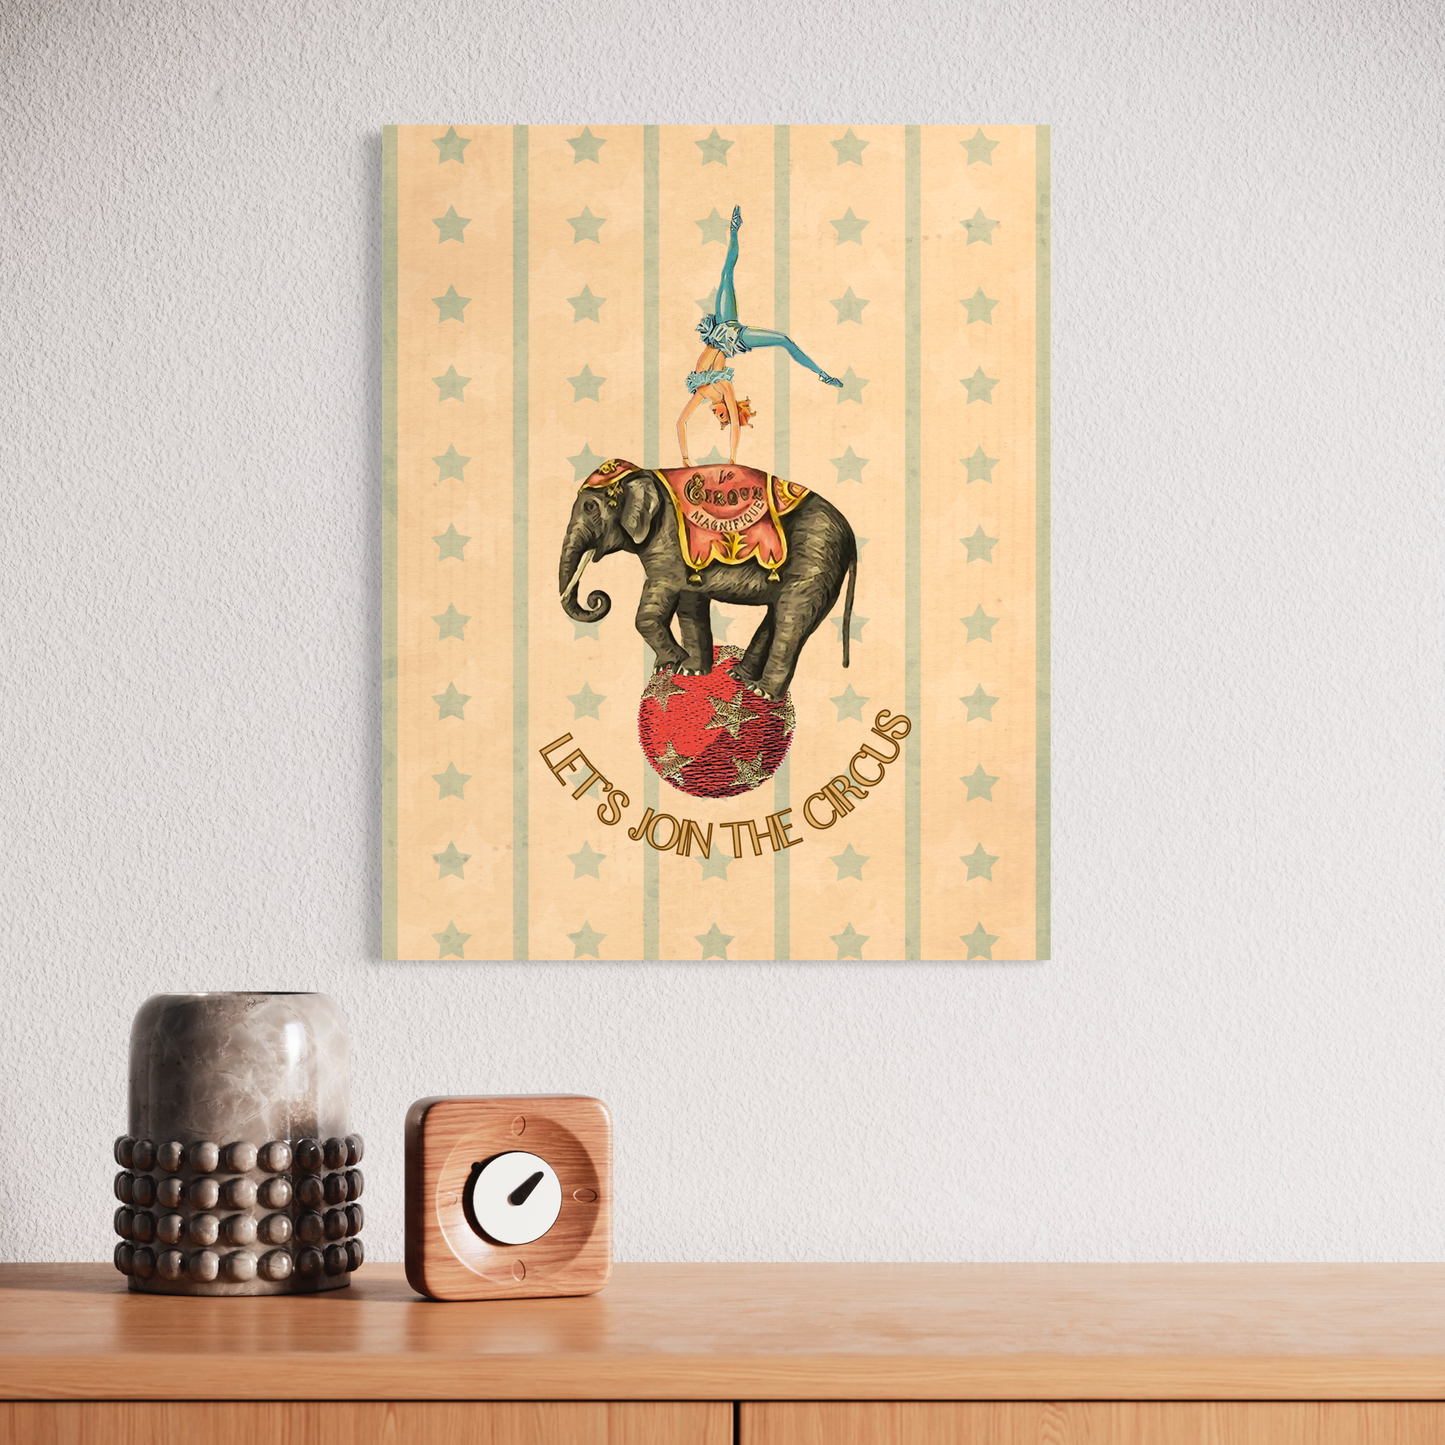 Poster Prints "Let's Join the Circus I"